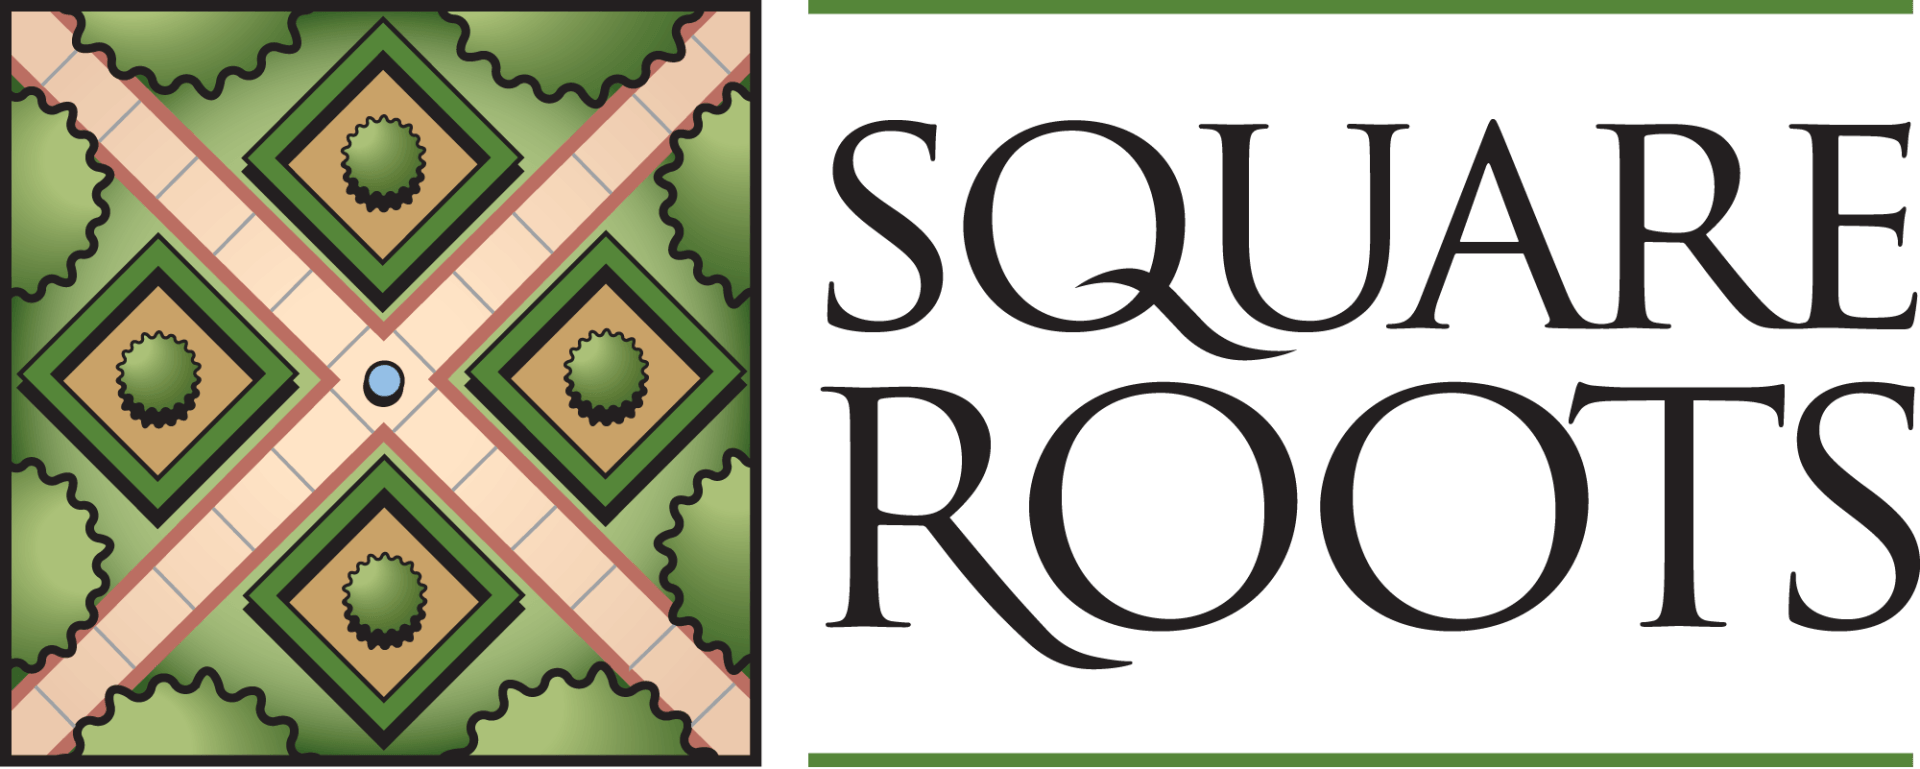 SQUARE ROOTS